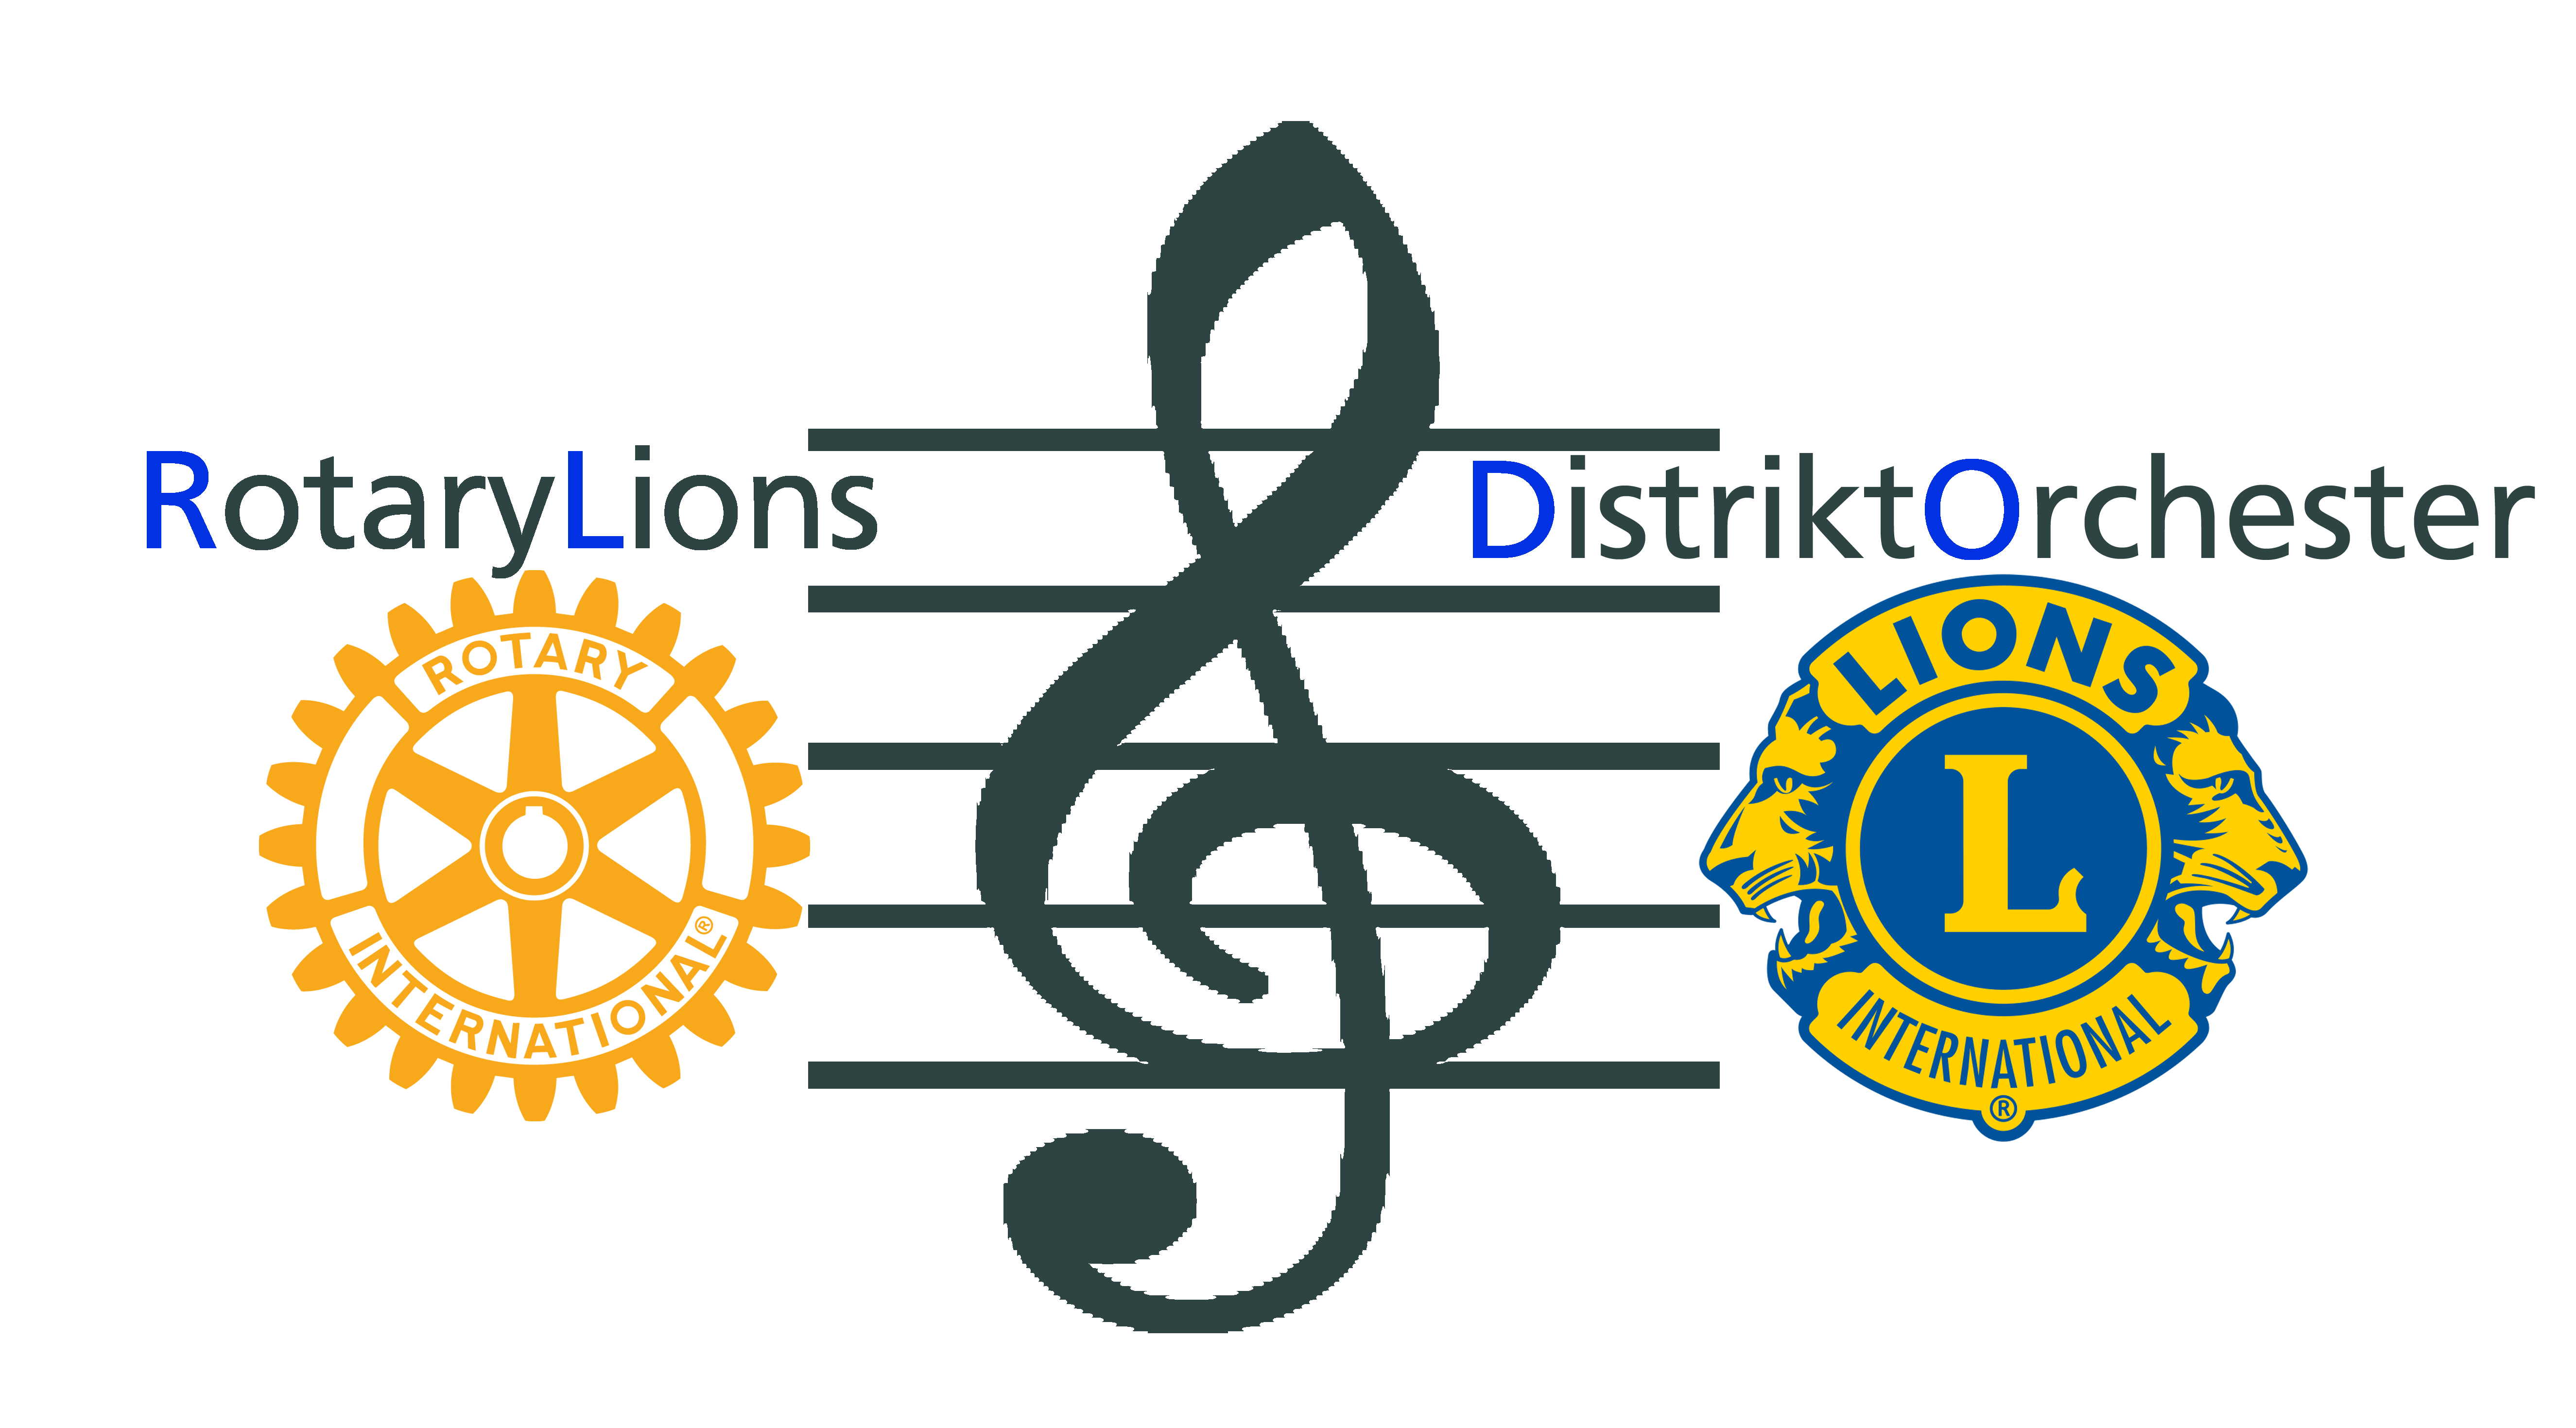 Rotary Lions Distrikt Orchester